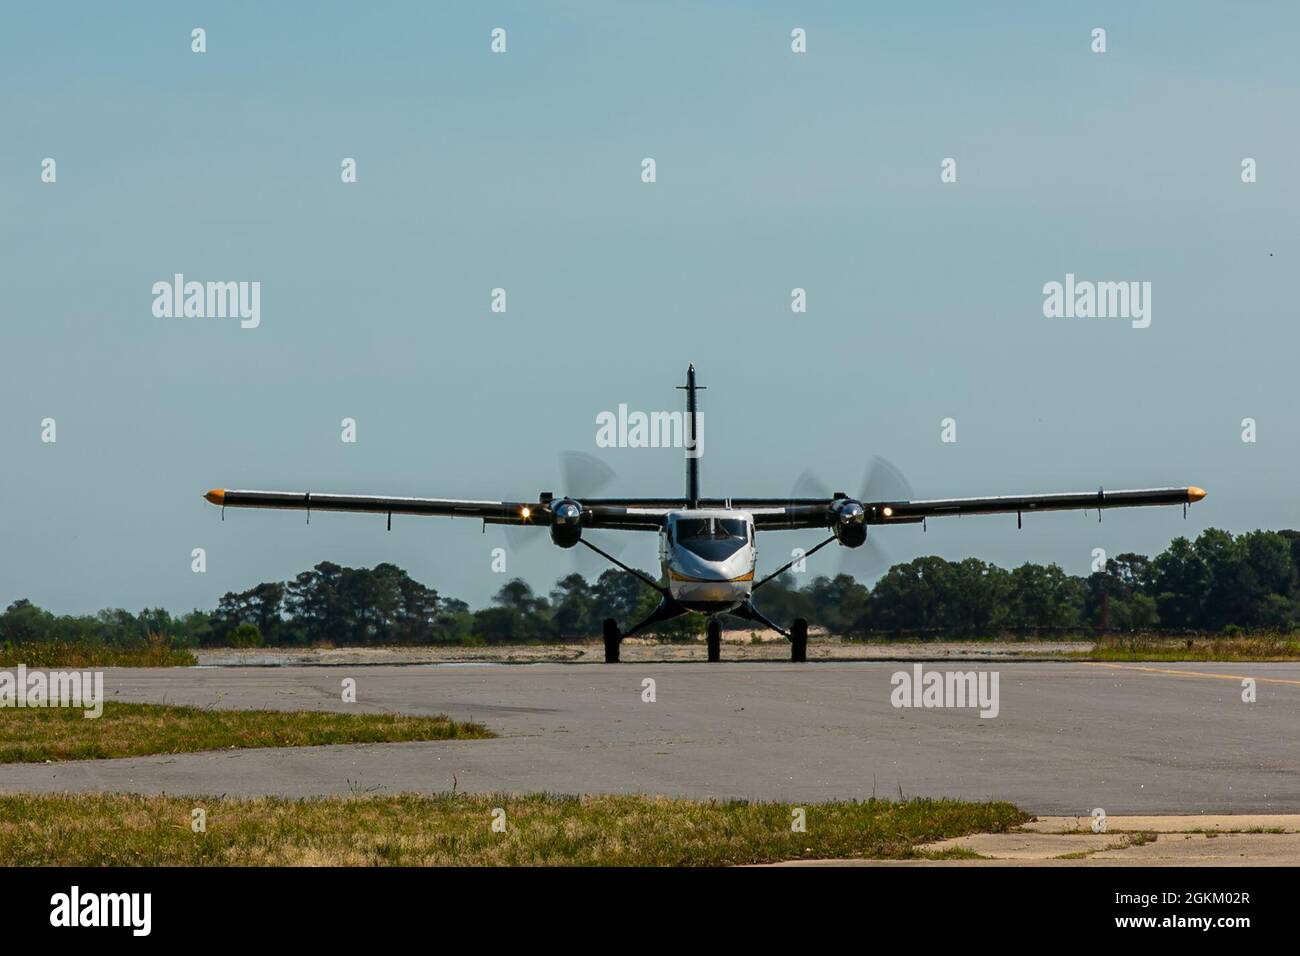 The C-147A, known as the Dash-8, arrives to pick up parachutists for the next airborne jump at Laurinburg- Maxton Airport. Stock Photo